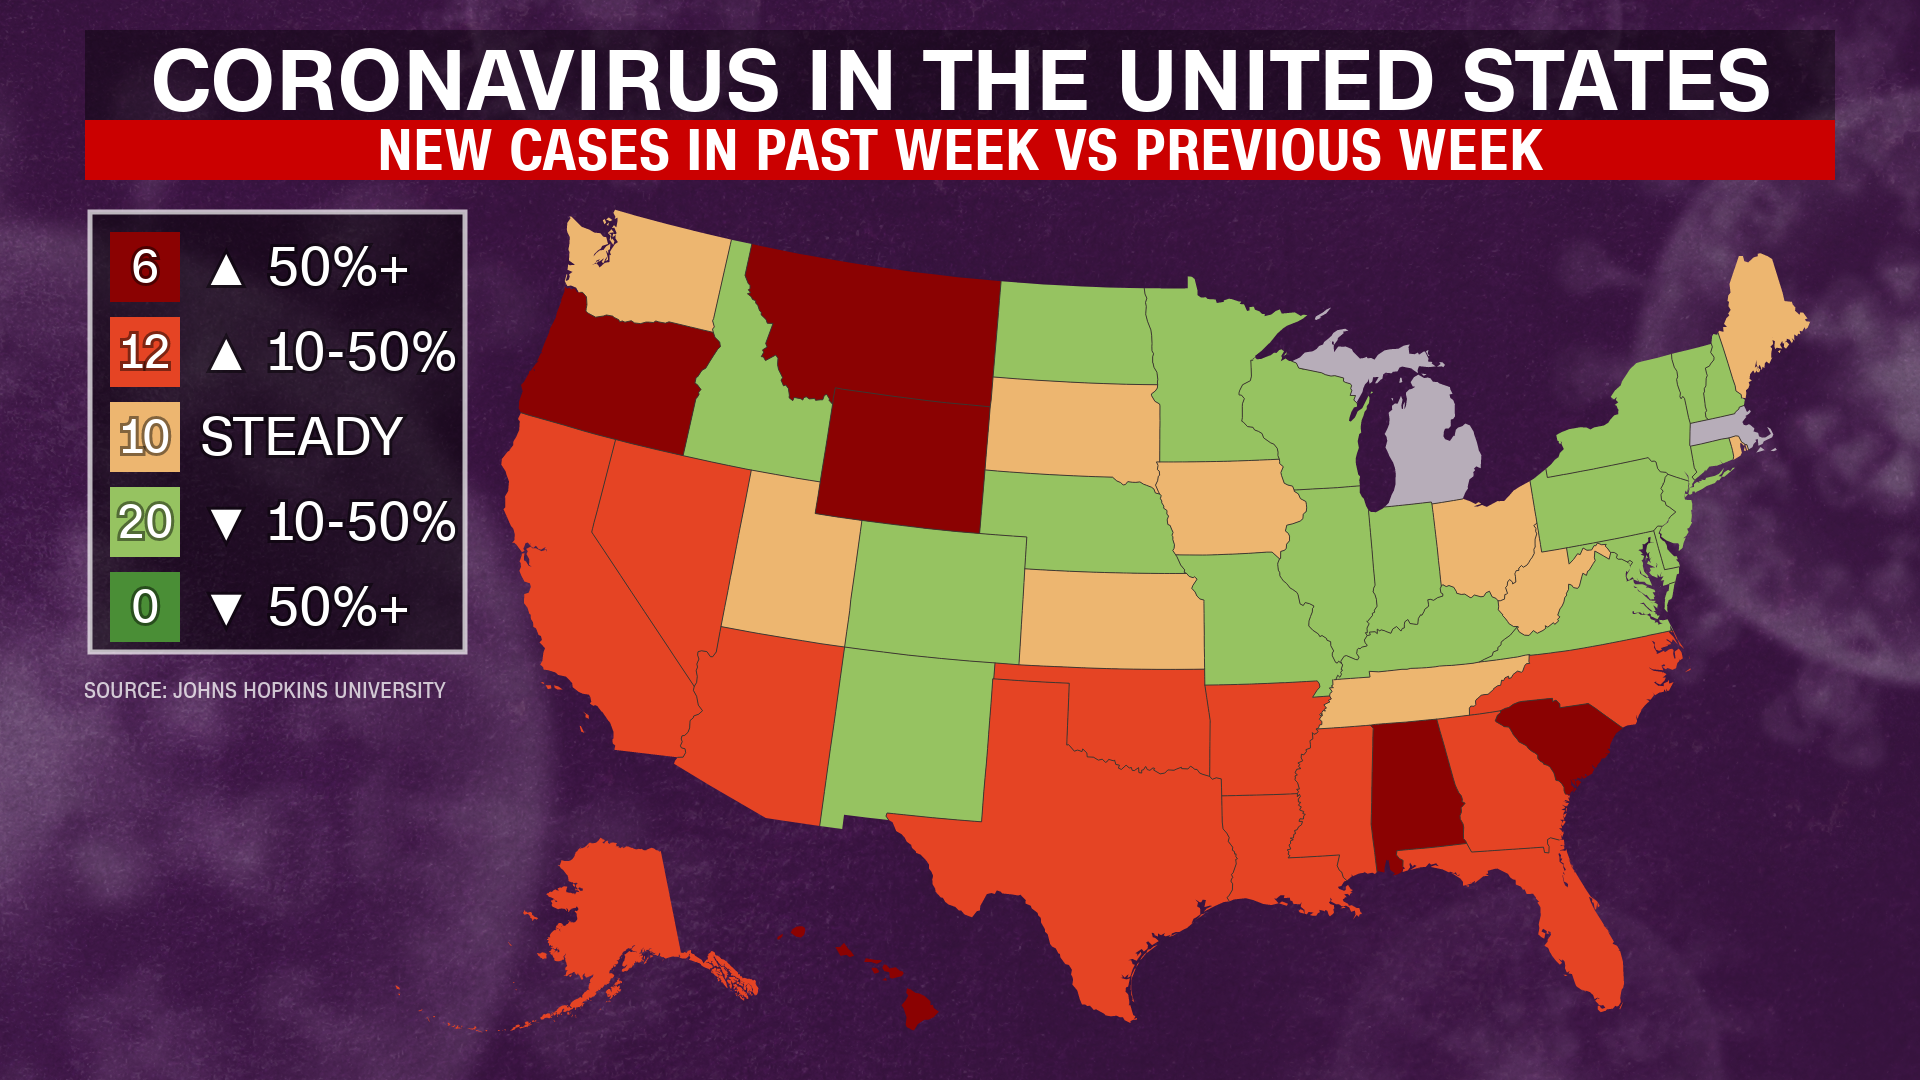 The number of coronavirus cases, which is increasing in 18 US states, predicts more deaths as a model